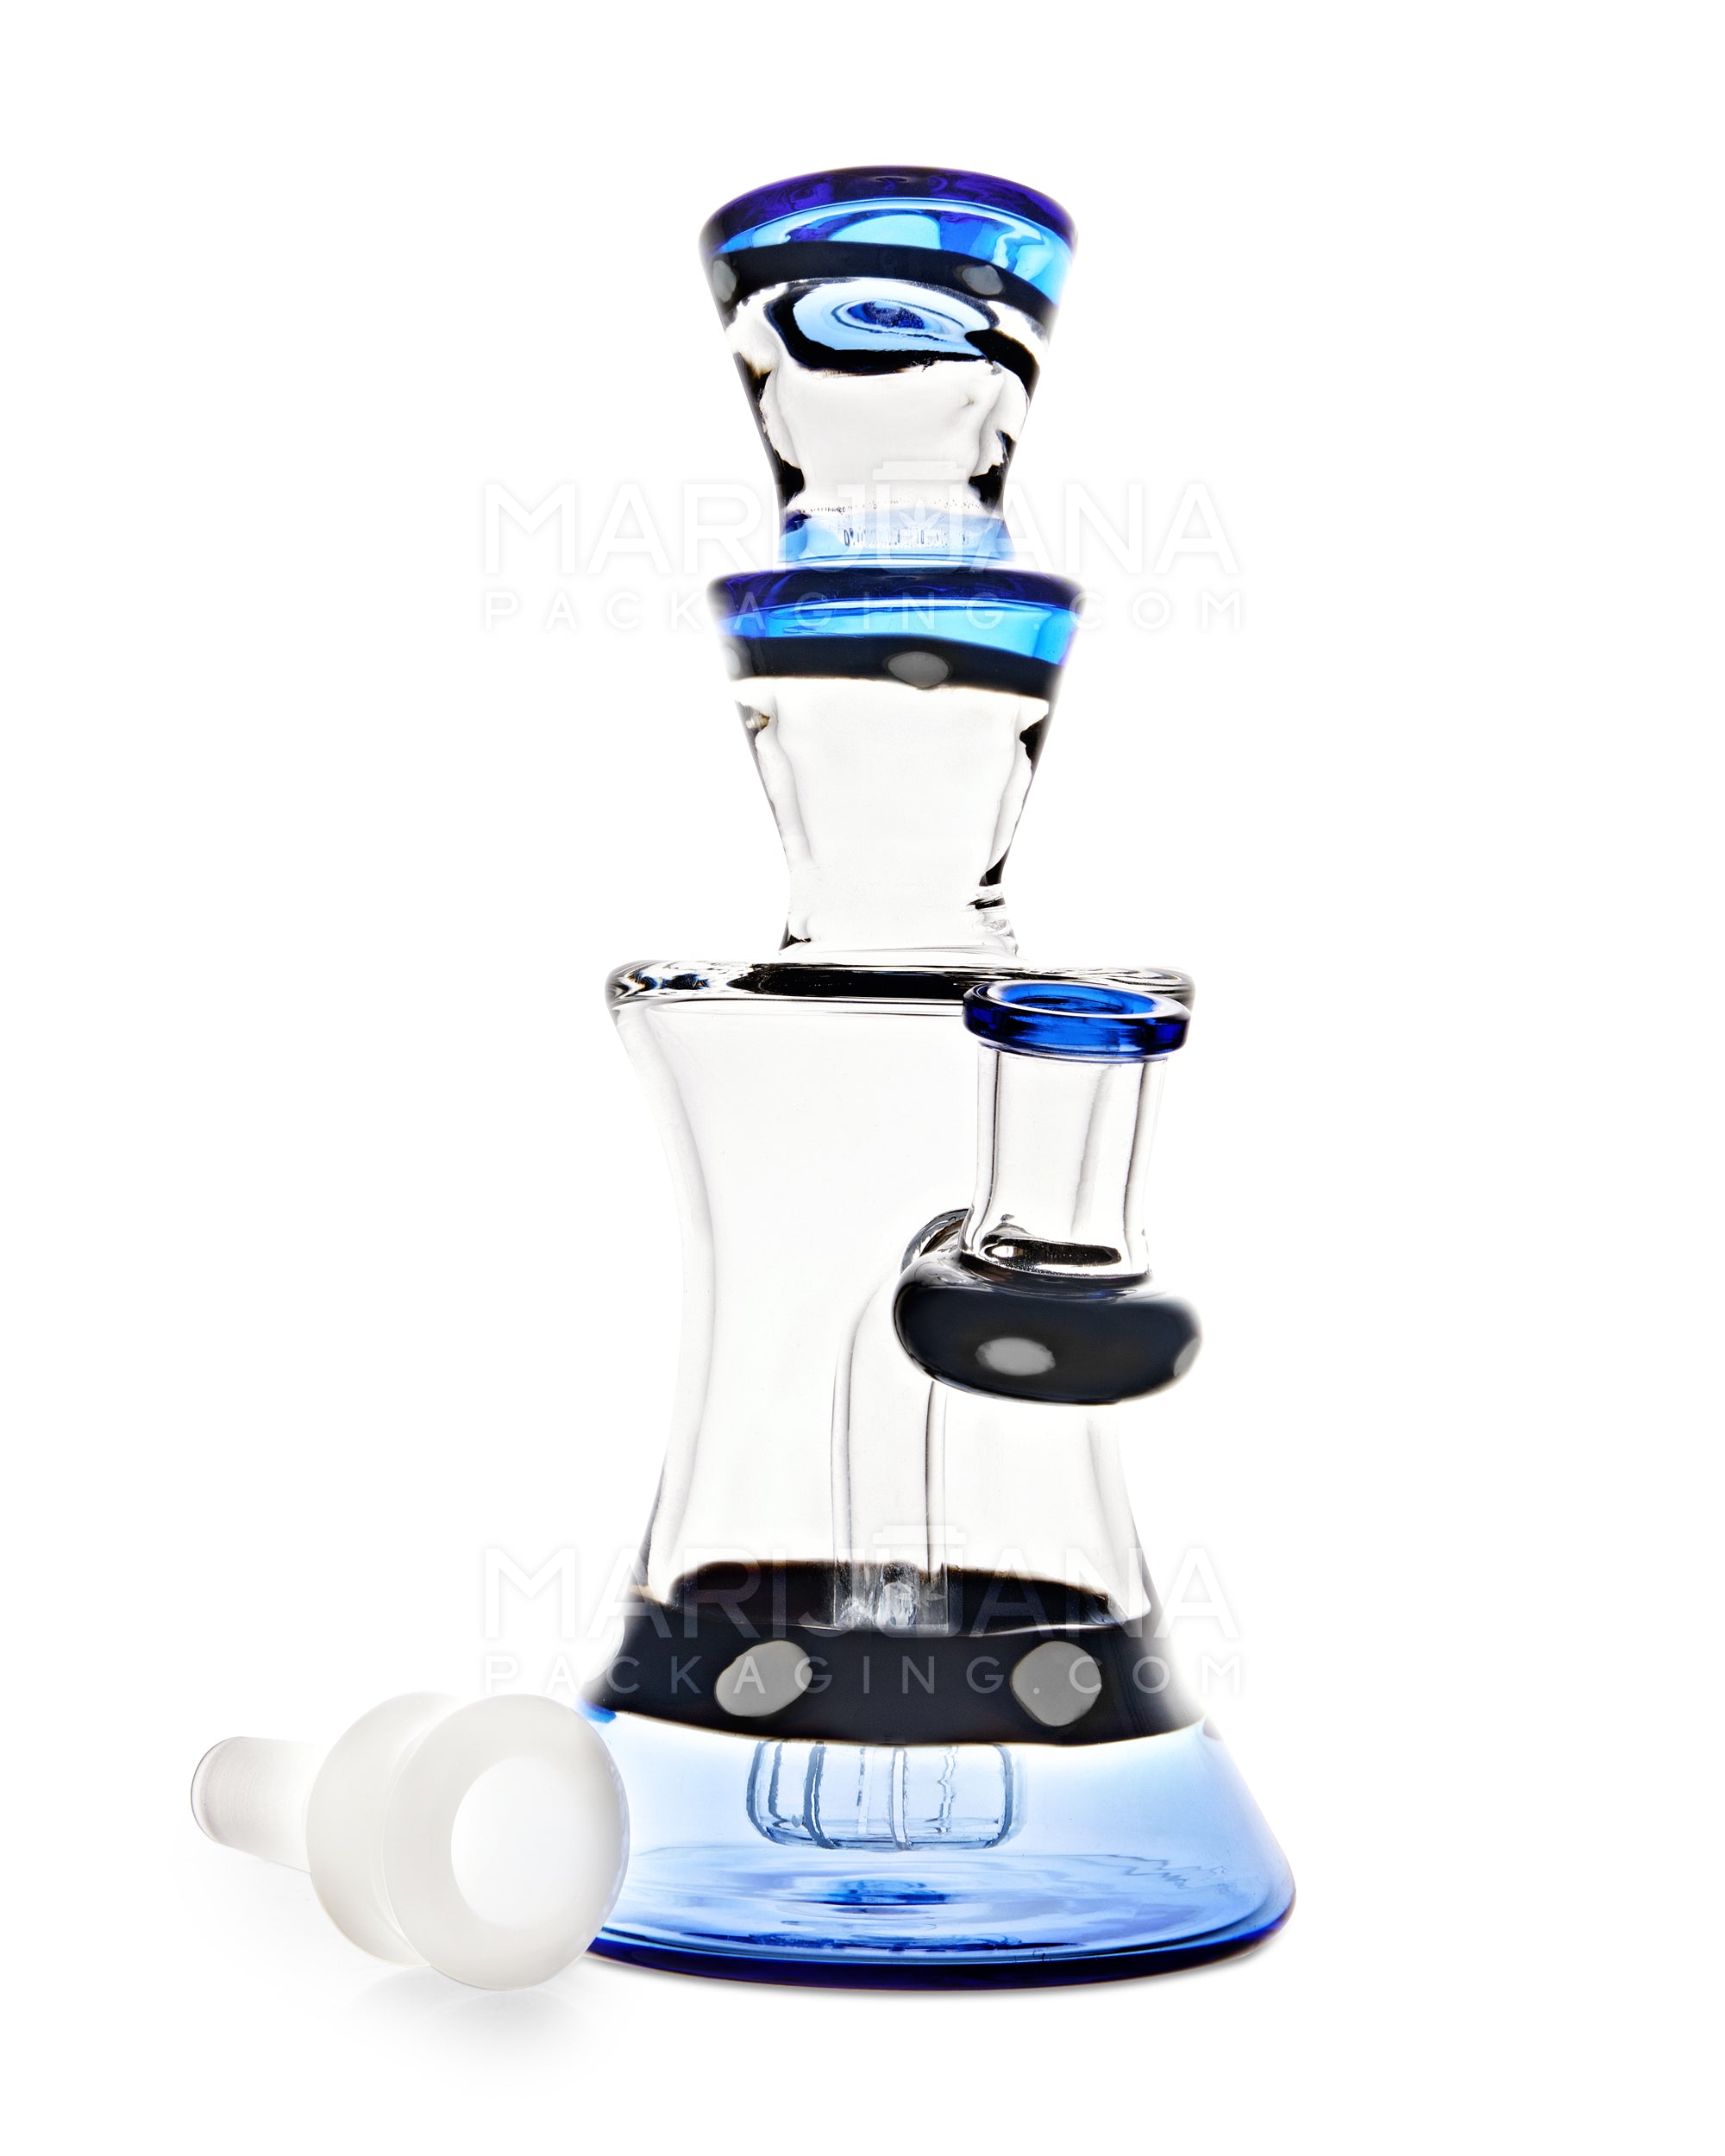 USA Glass | Angled Neck Showerhead Perc Kickback Hourglass Water Pipe w/ Indented Bowl | 7.5in Tall - 14mm Bowl - Blue